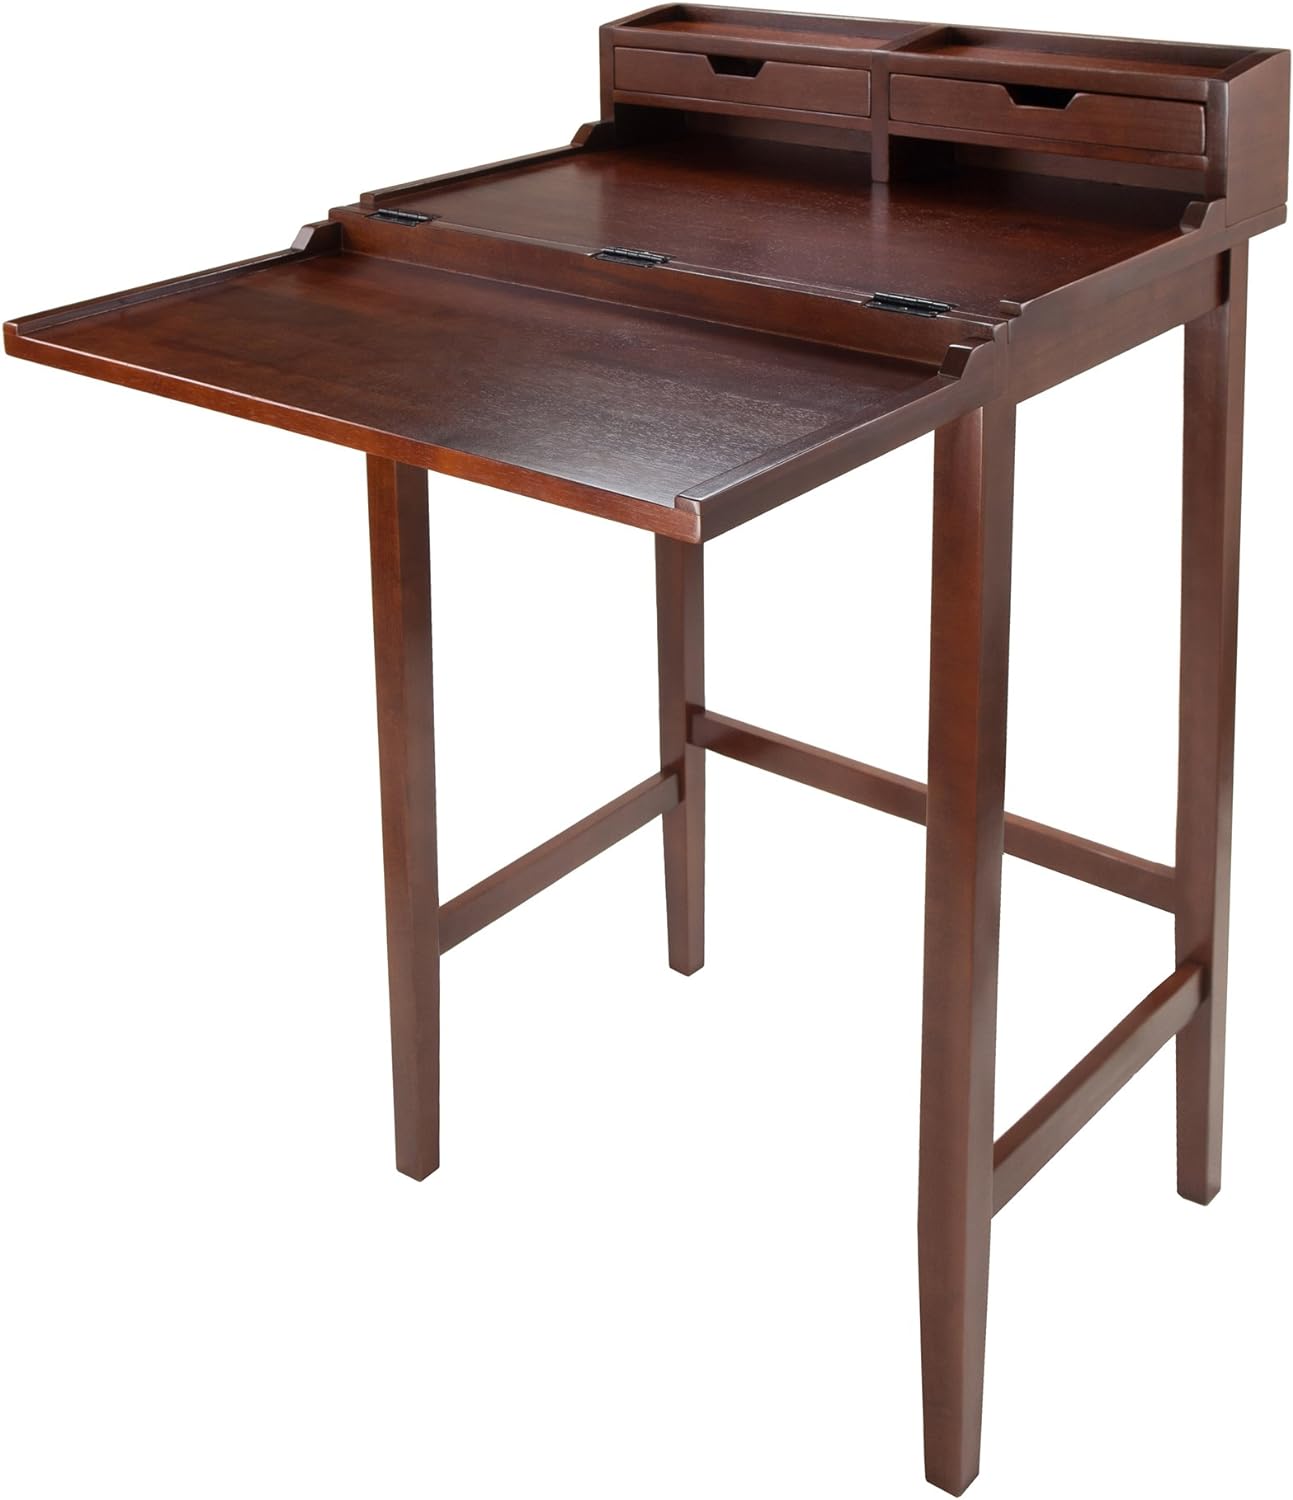 Winsome 94628 High Desk with Flip-out Writing Area and Hutch, Walnut